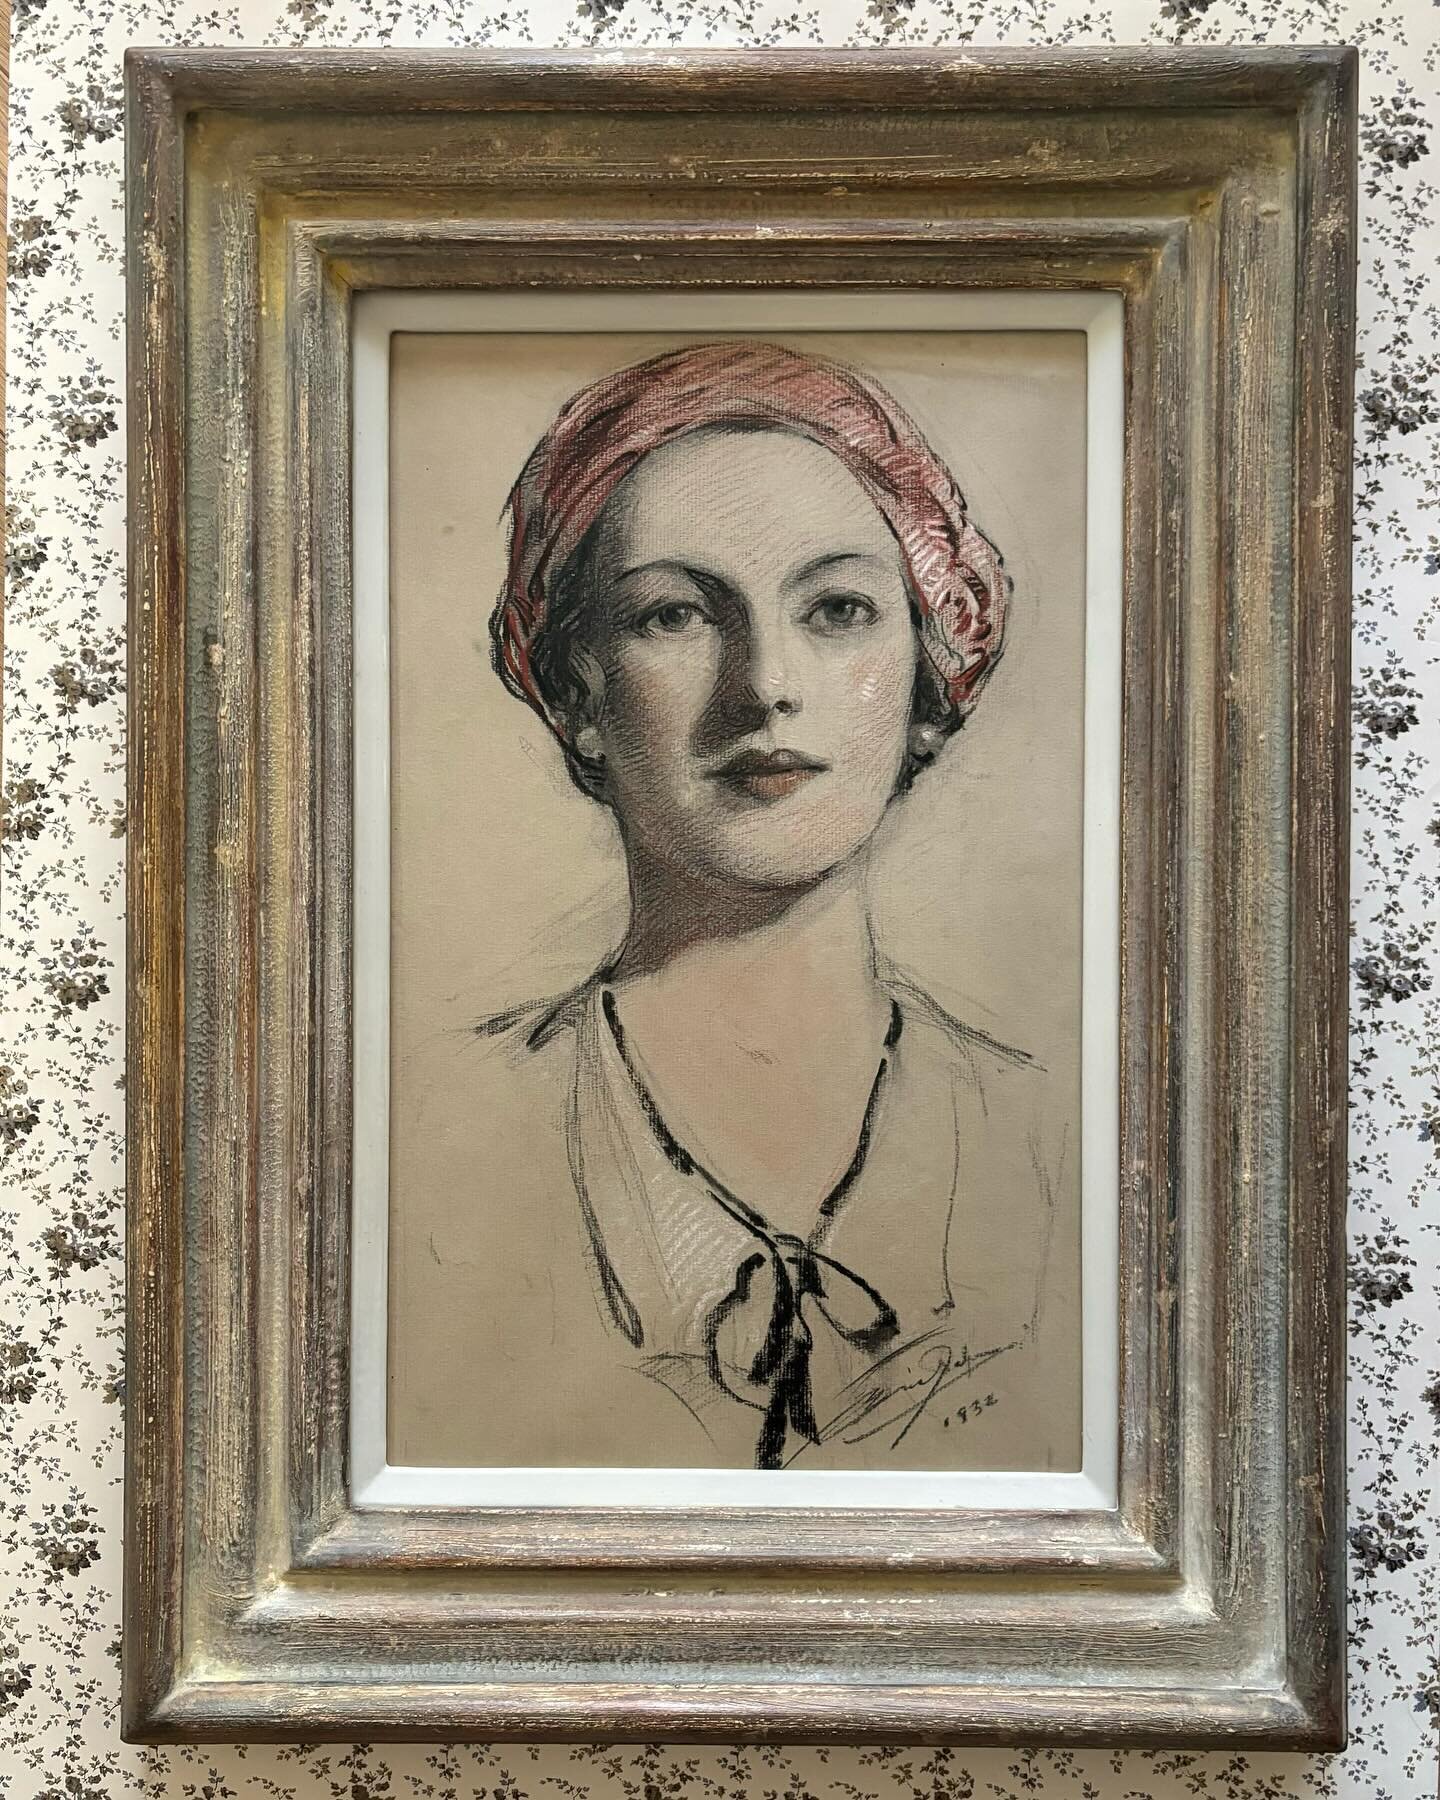 FOR SALE: An evocative charcoal, pastel and crayon portrait from the 1930s by the acclaimed American artist and illustrator, Eric Pape (1870 - 1938).

Pape successfully captures not just the physical presence of his sitter but the essence of a bygone